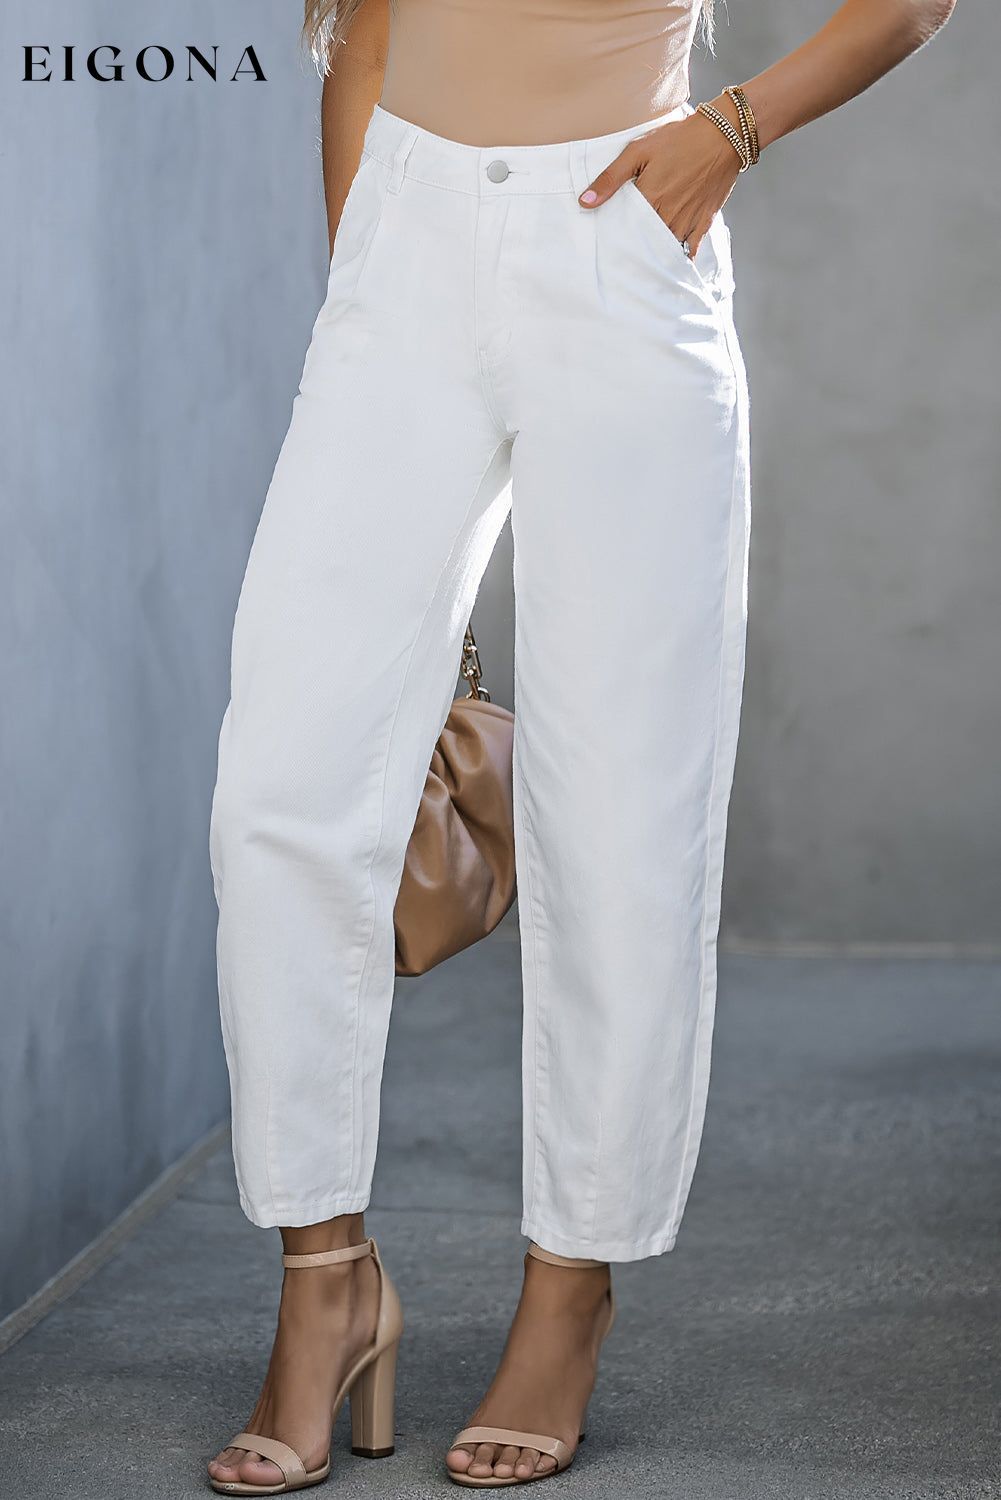 White Solid High Waist Casual Pants bottoms clothes DL Exclusive Occasion Daily pants Print Solid Color Season Spring Silhouette Wide Leg Style Modern Women's Bottoms